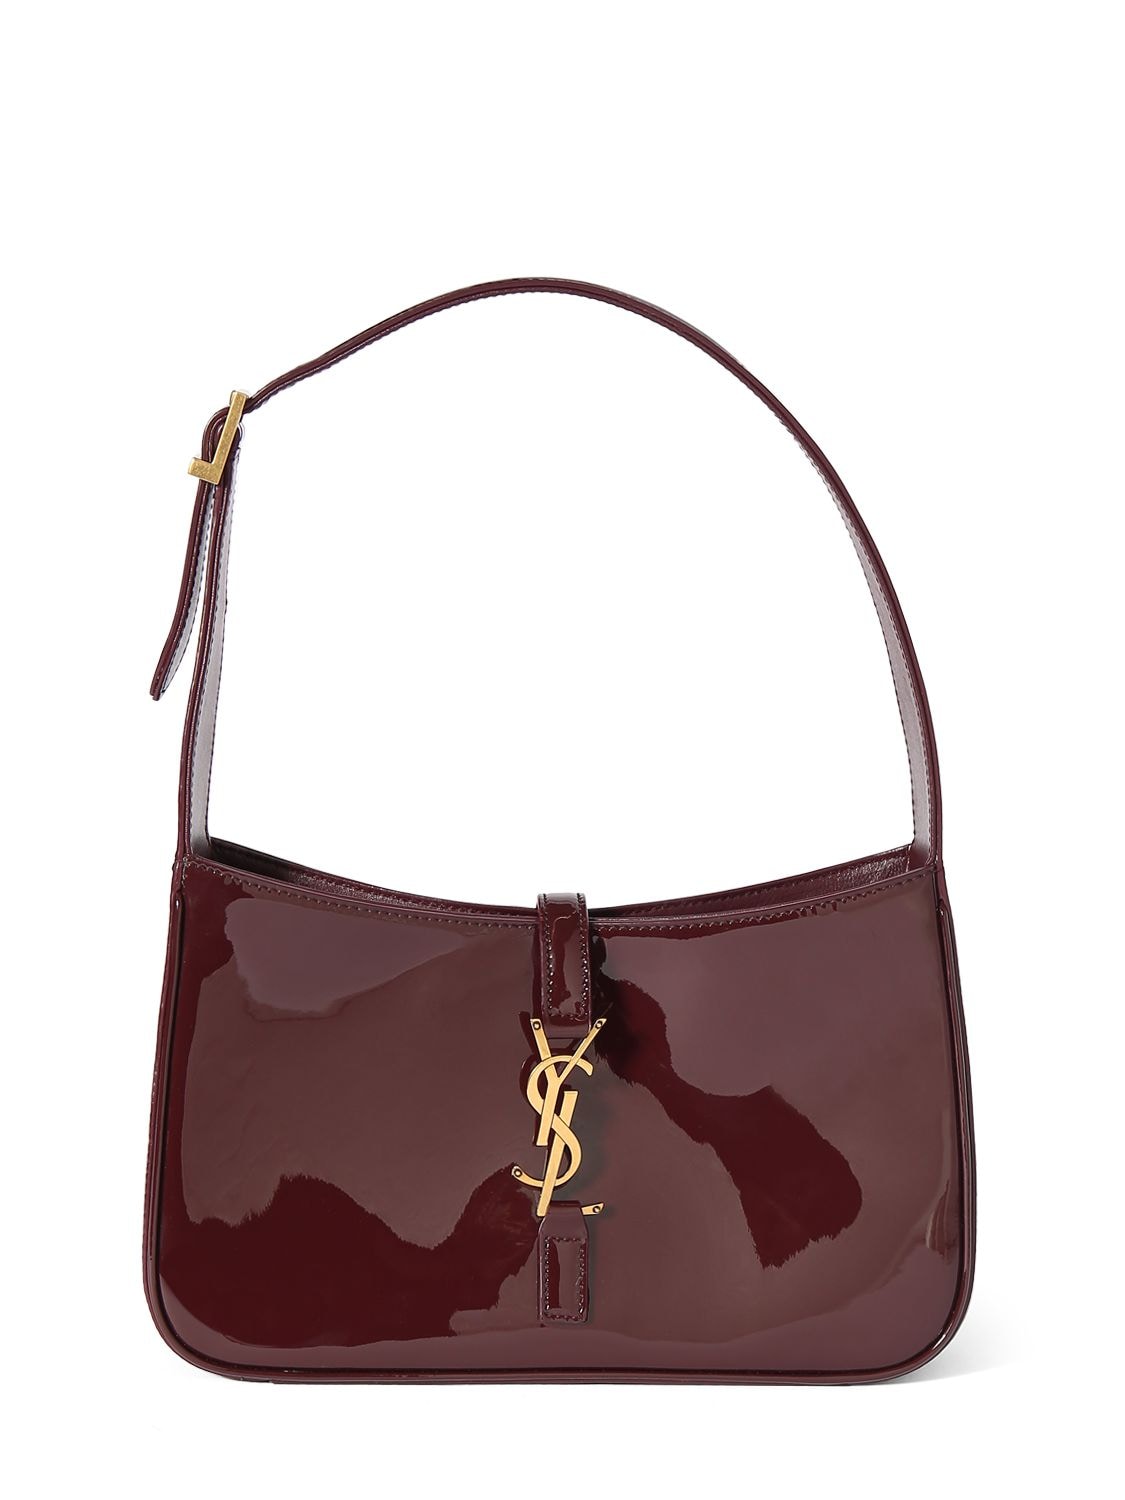 Saint Laurent Le 5 À 7 Leather Hobo Bag In Dark Red Wine